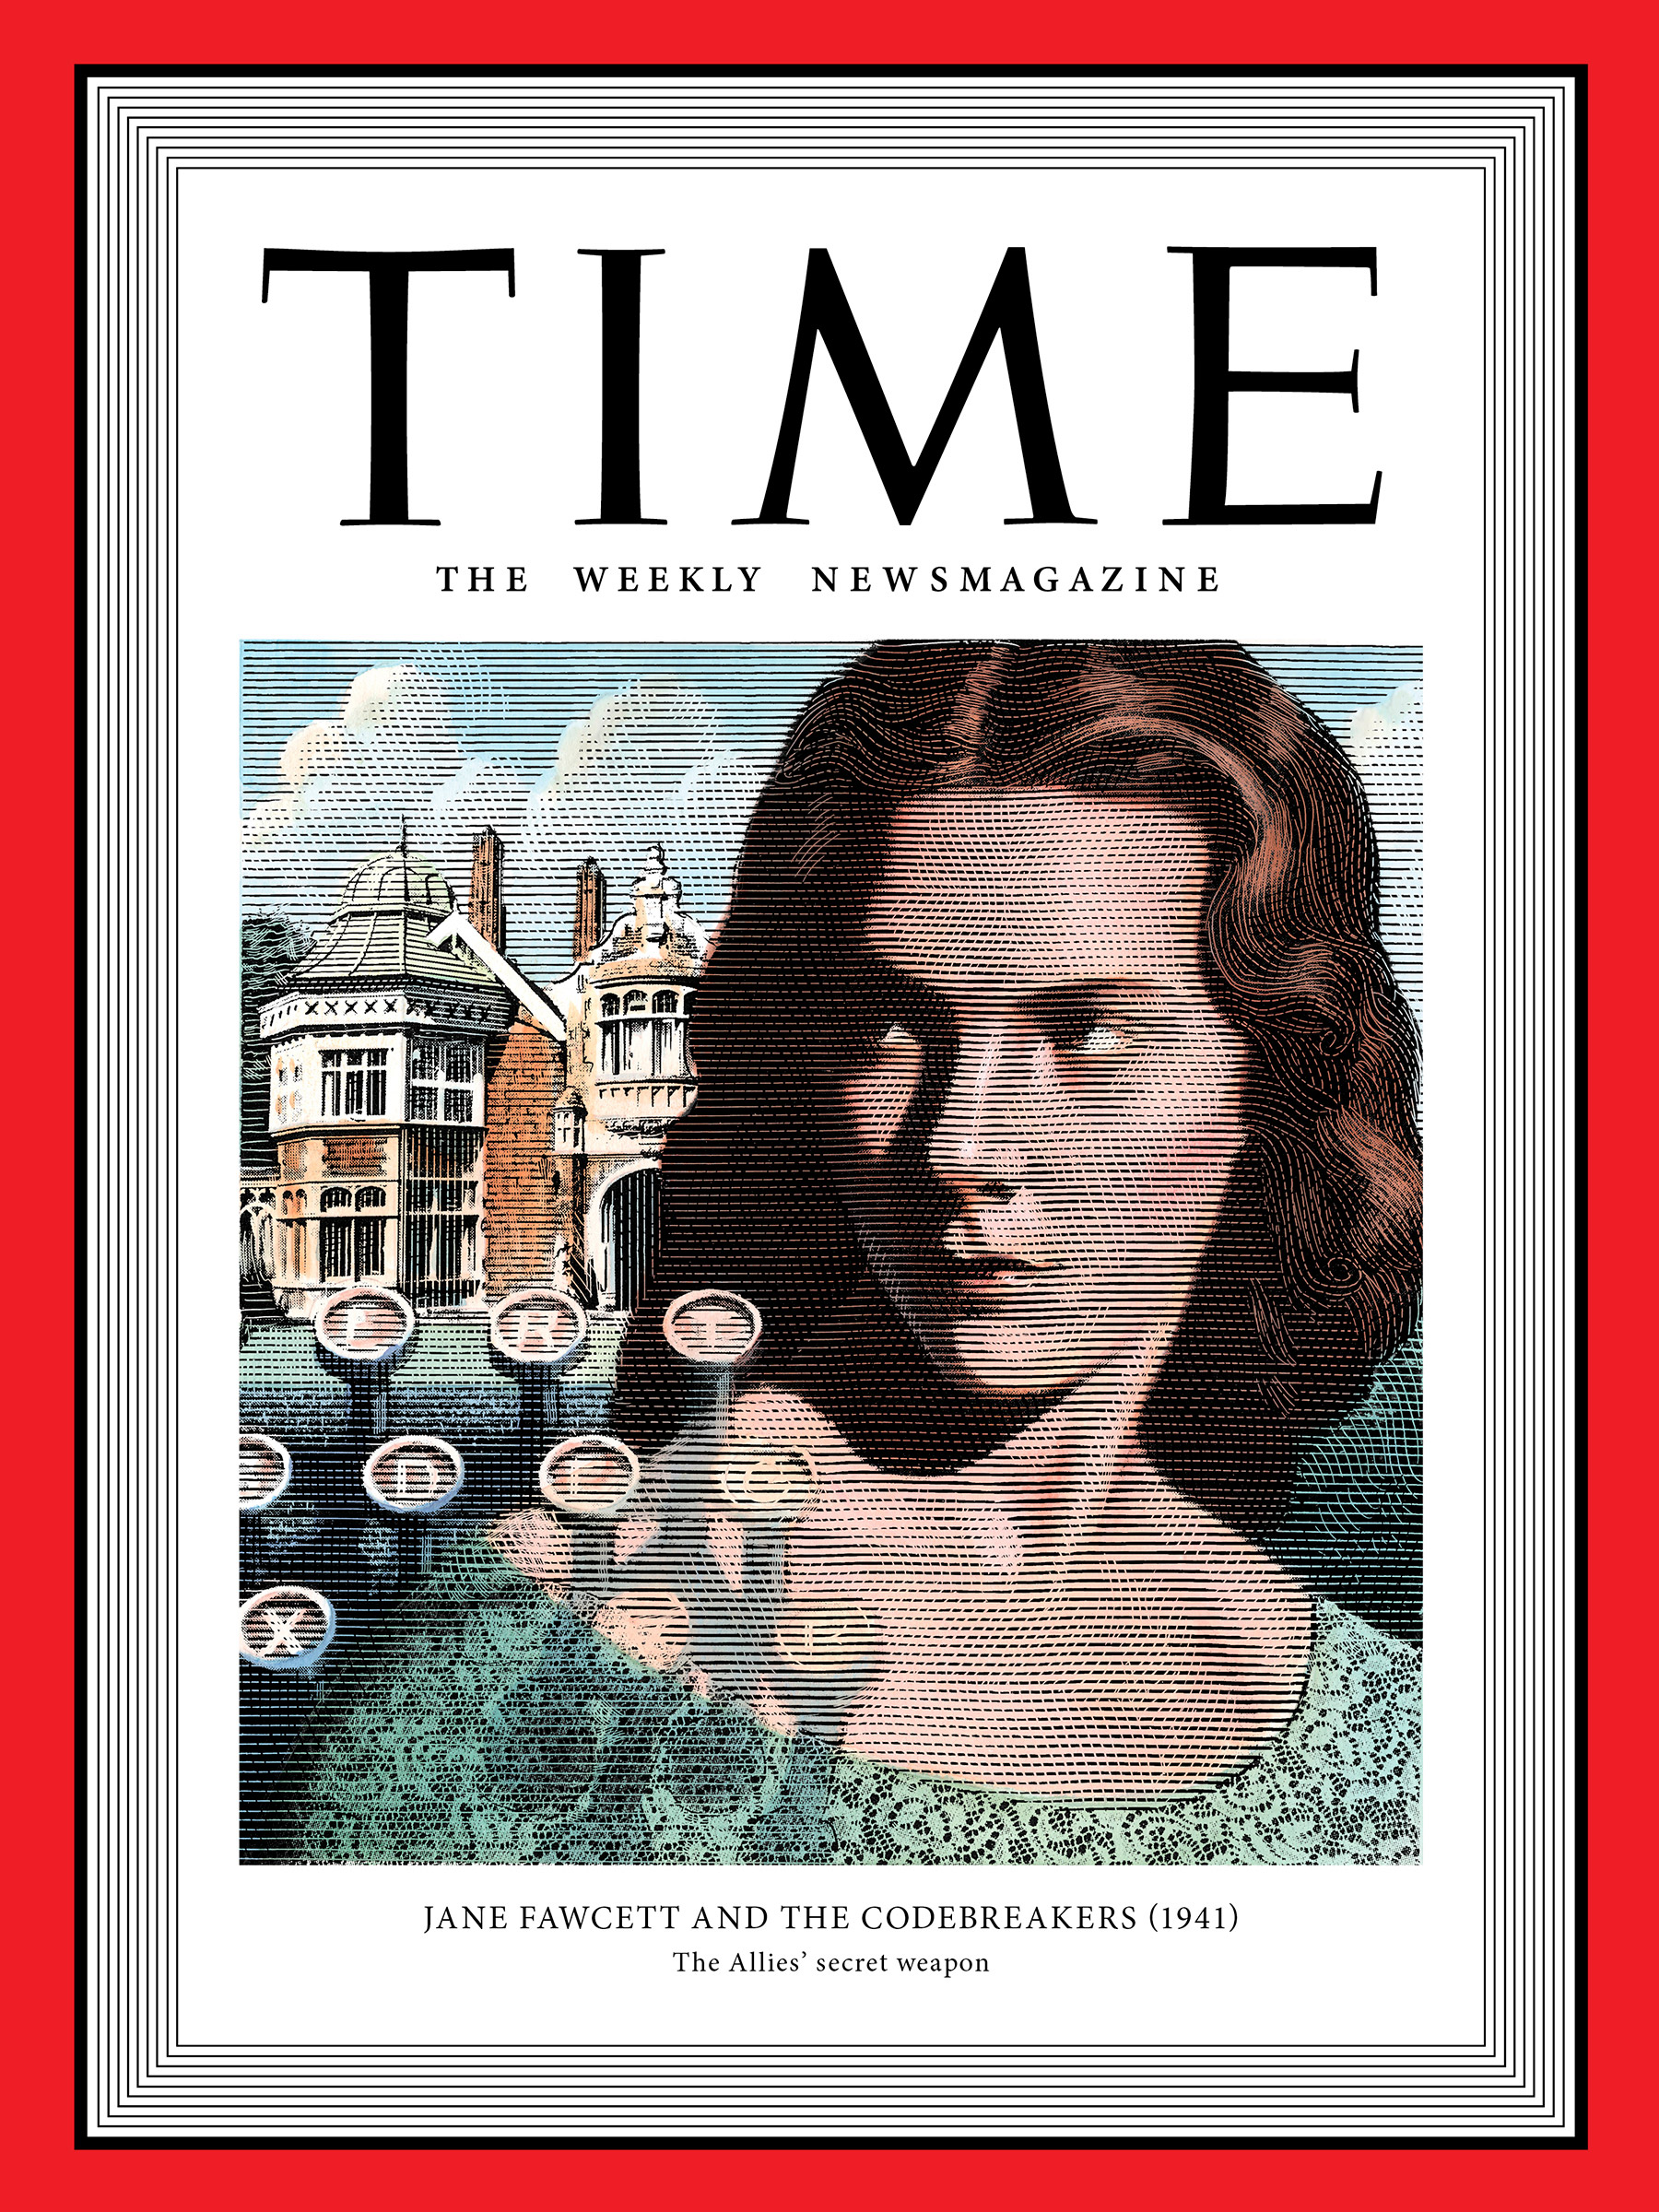 <a href="https://fineartamerica.com/featured/babe-didrikson-1932-time.html"><strong>Buy the cover art→</strong></a> (Illustration by Mark Summers for TIME; Fawcett Family/Anthony Crowley/Camera Press/Redux)